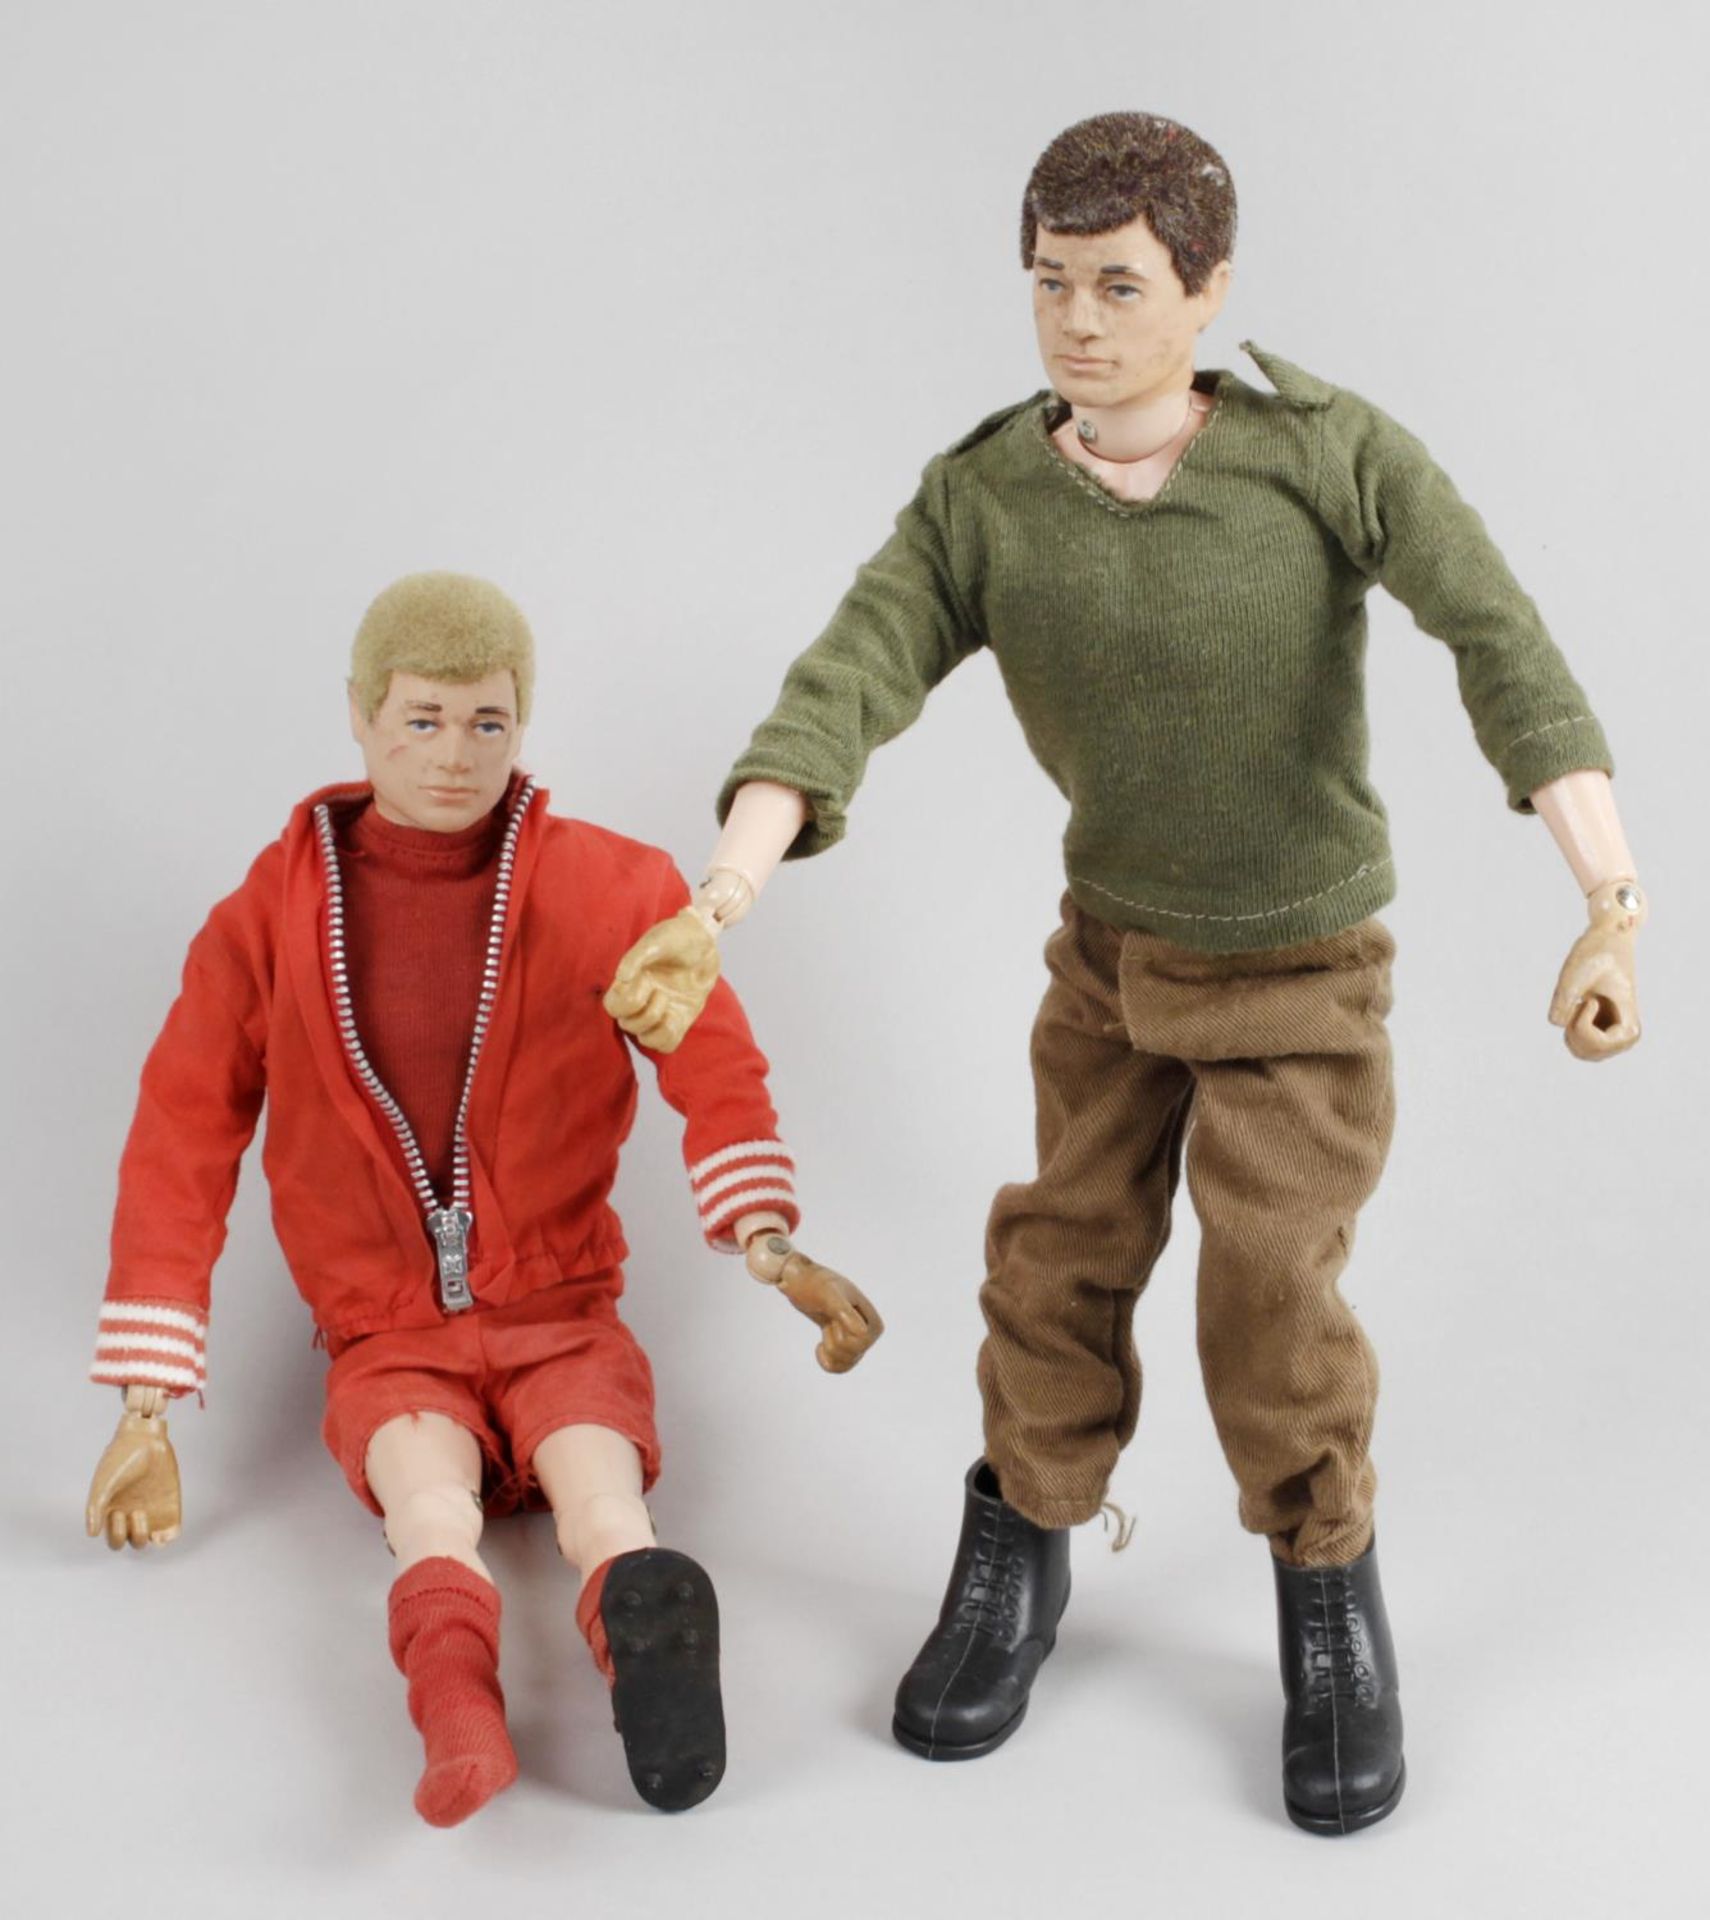 A Palitoy Action Man soldier figure in original box,